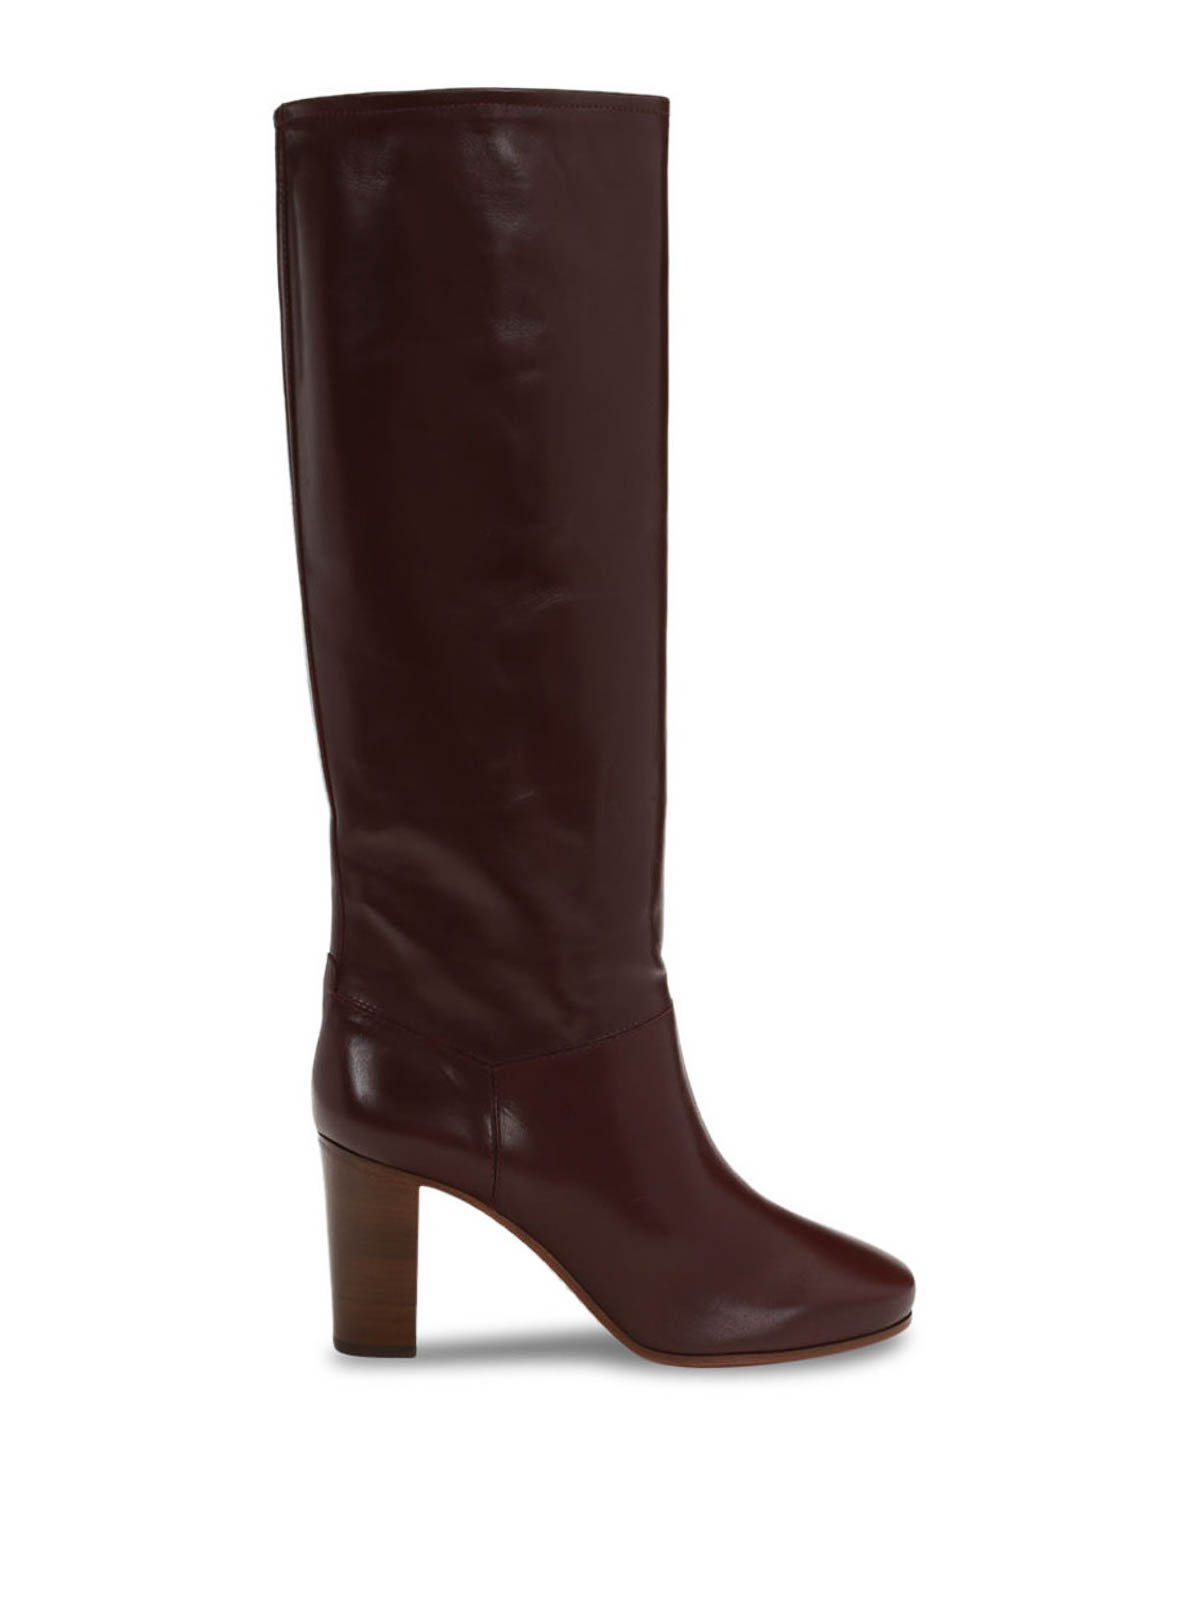 celine leather boots